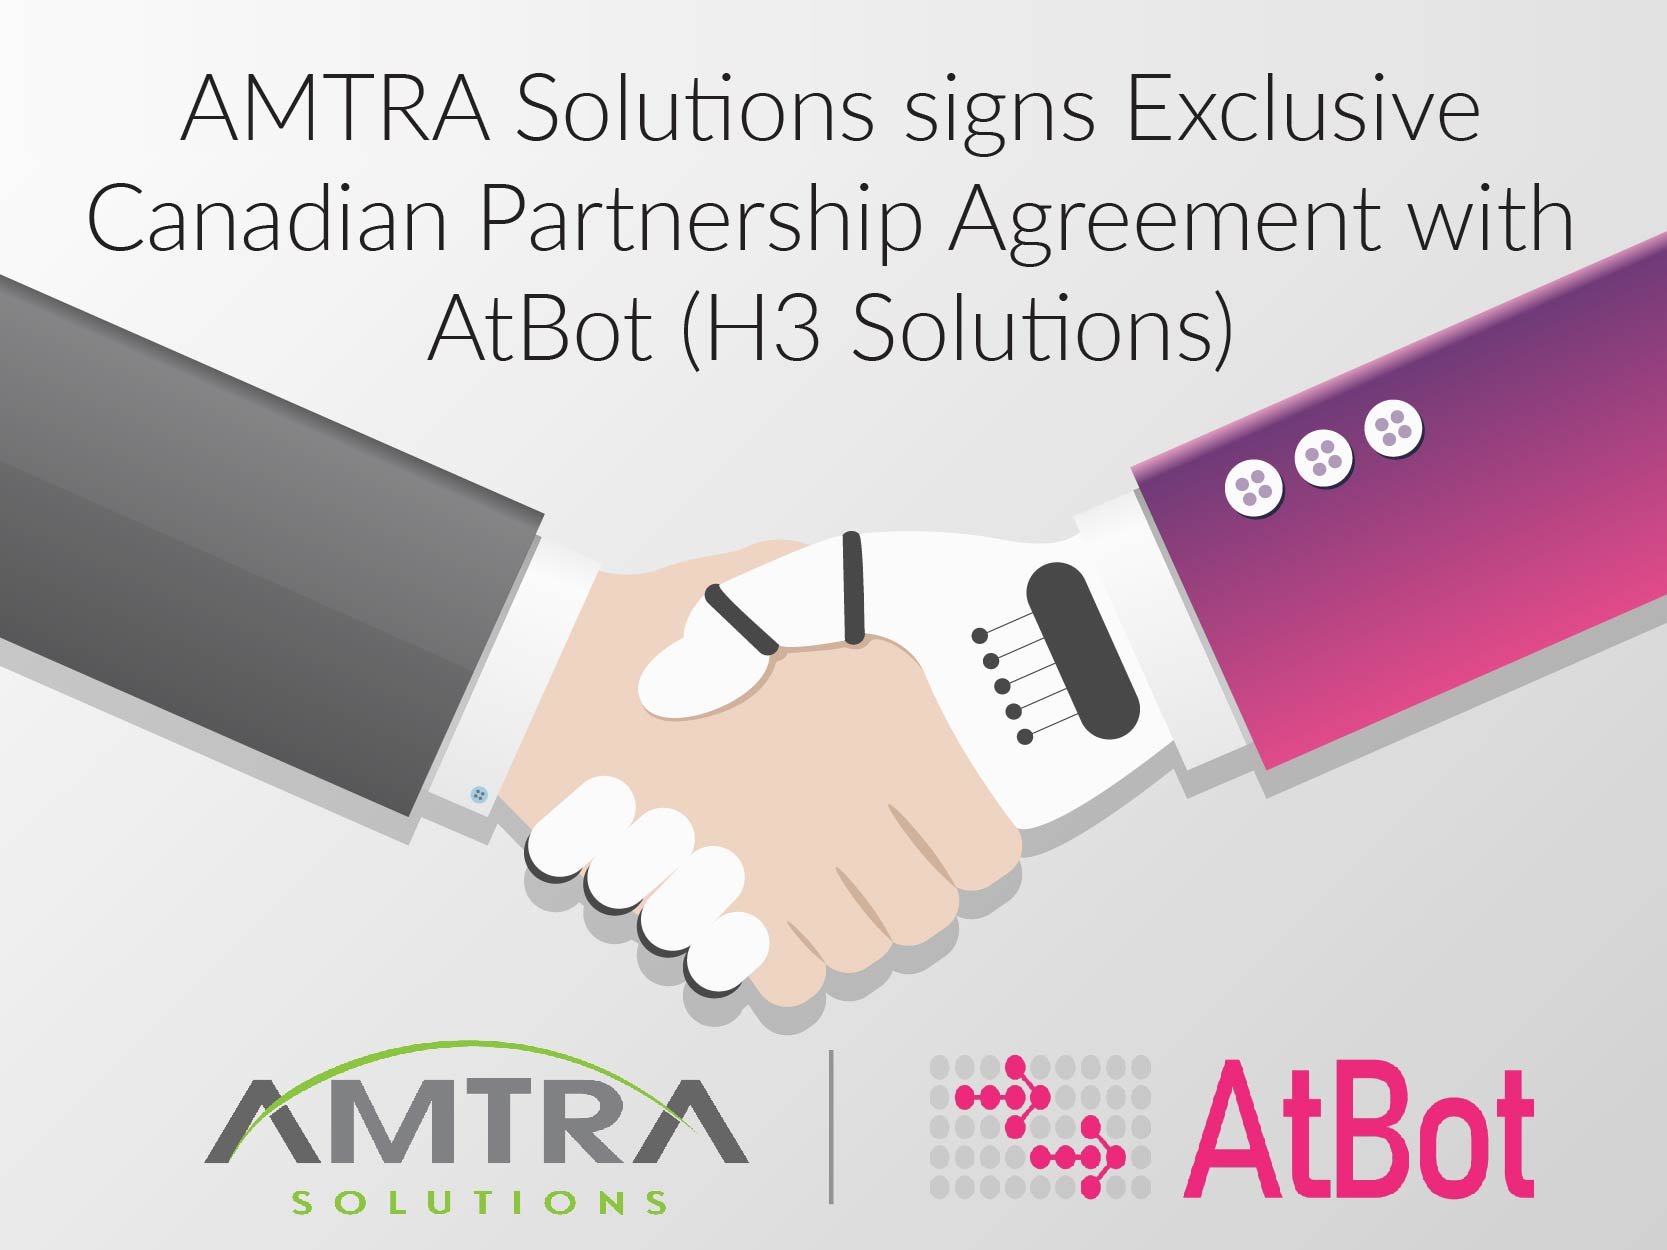 AMTRA Solutions signs Exclusive Canadian Partnership Agreement with AtBot (H3 Solutions)